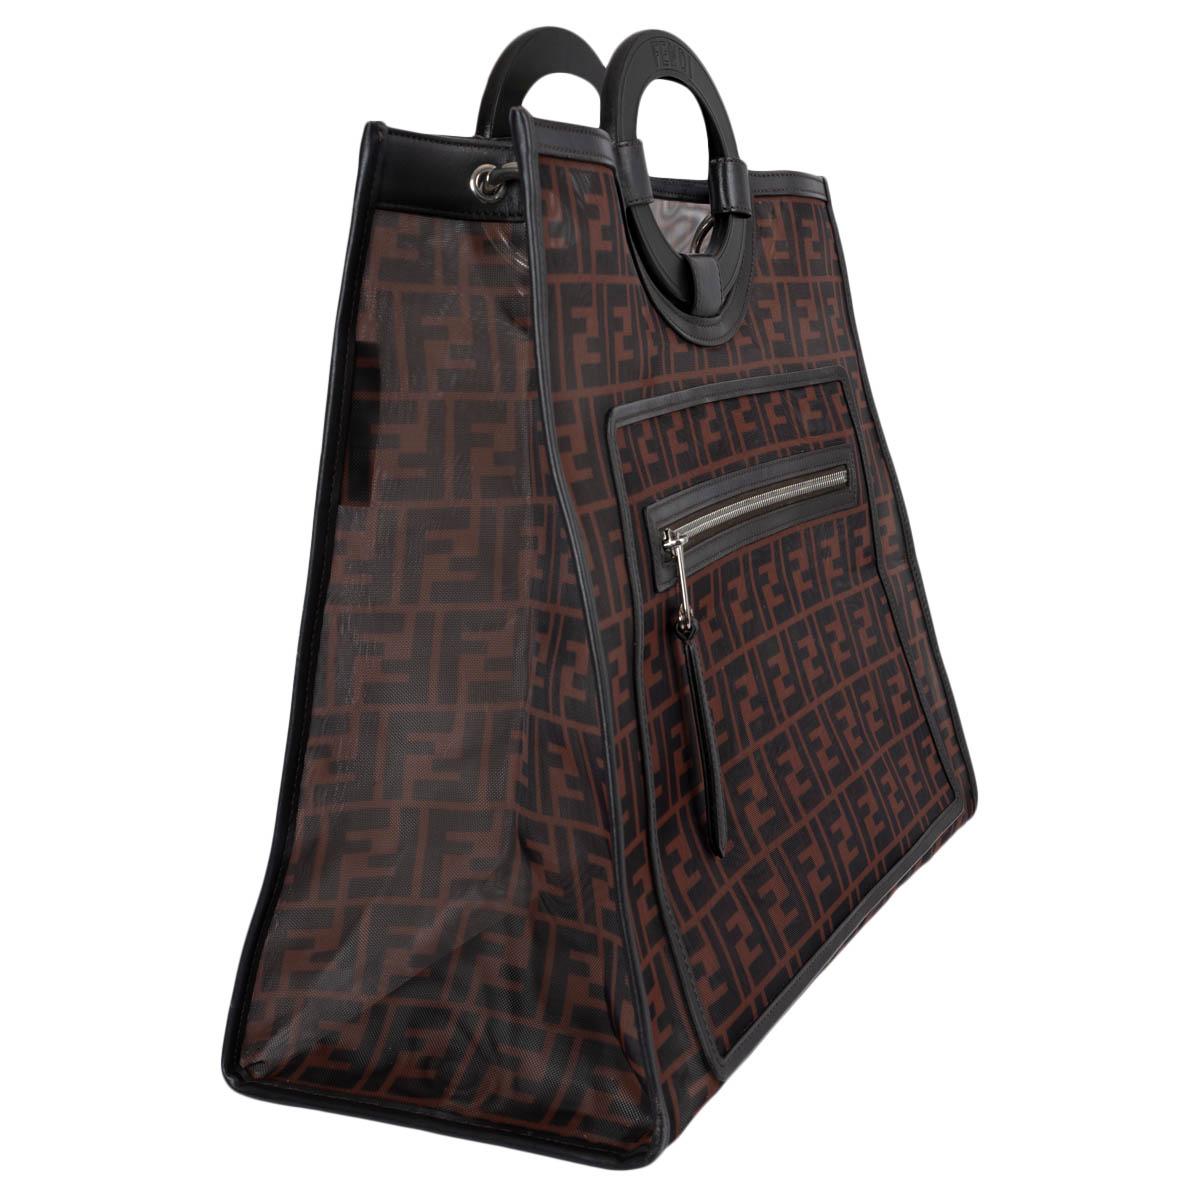 100% authentic Fendi Runaway shopping tote bag in dark brown and cognac brown mesh featuring dark brown leather tim and handles. The design features a zipper front pocket and is unlined. Has been carried and shows a tiny lighter dot on the front and